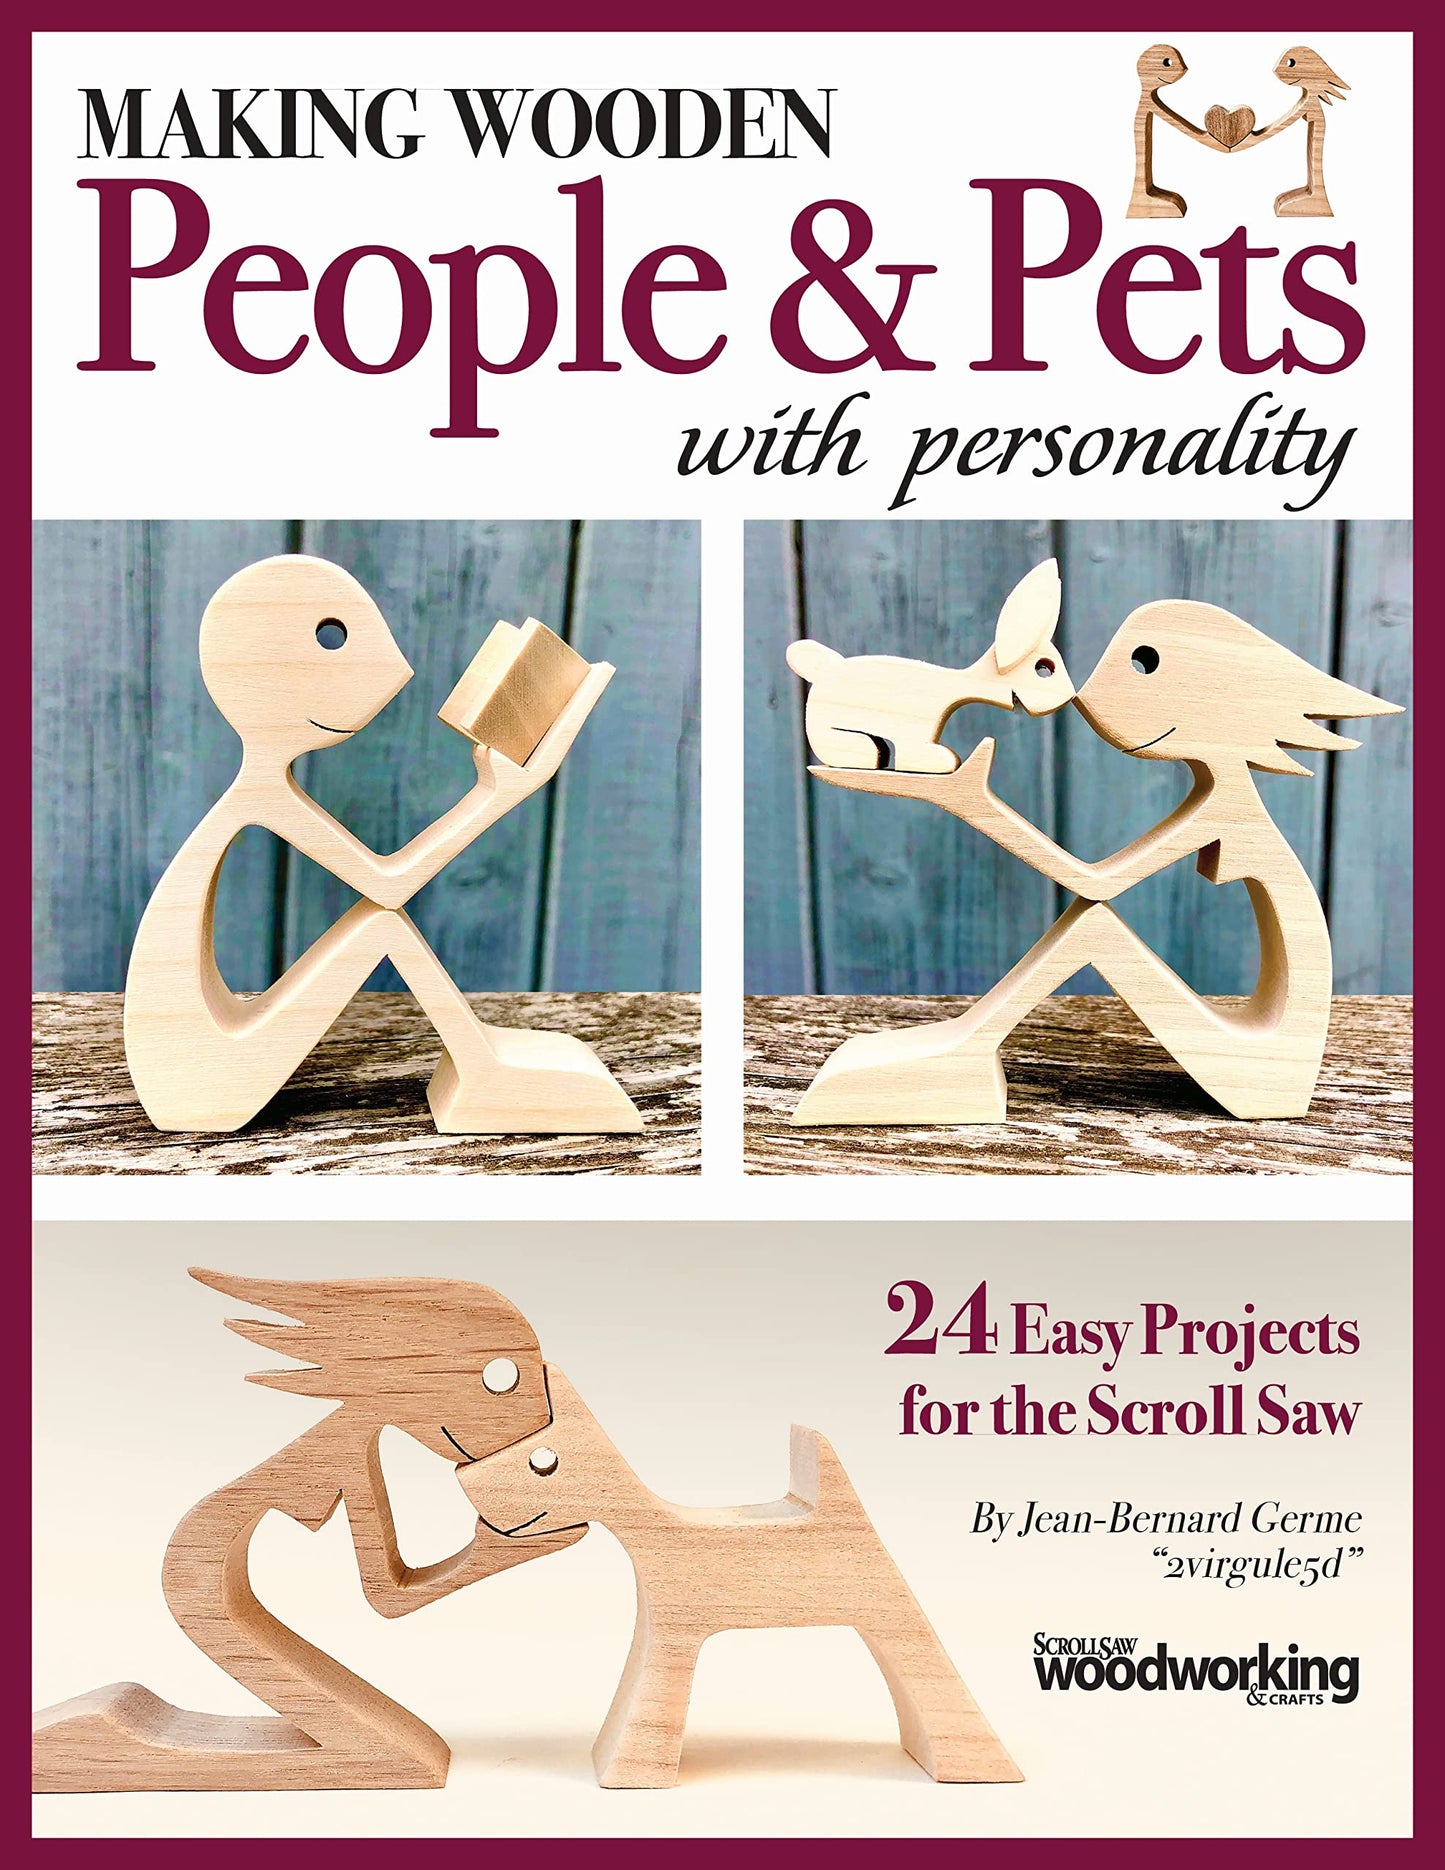 Making Wooden People & Pets with Personality: 24 Easy Projects for the Scroll Saw (Fox Chapel Publishing) Full-Size Patterns for Beginners and